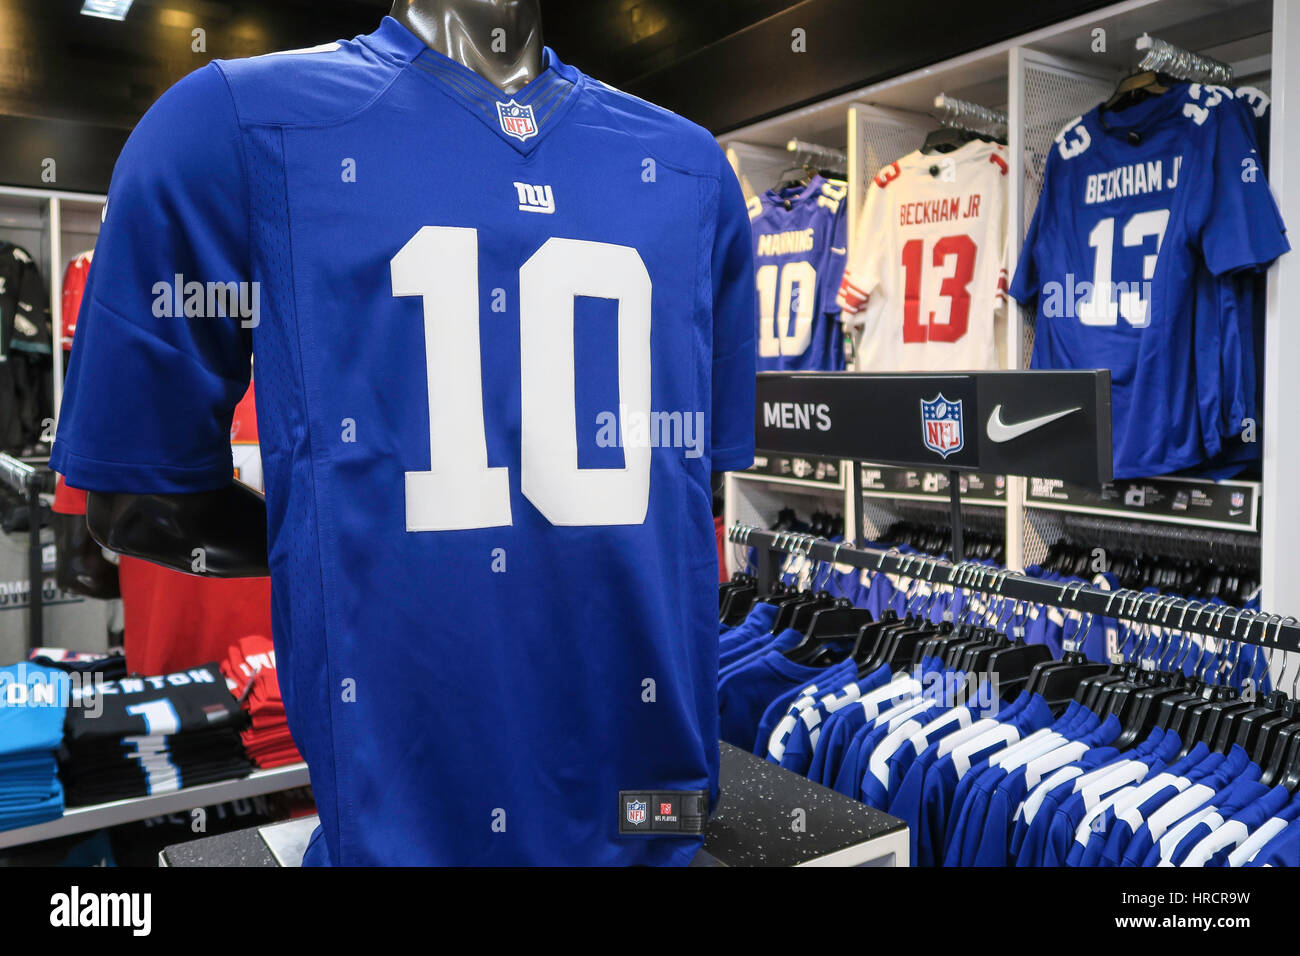 NFL Branded Clothing Display, Modell's Sporting Goods Store Interior, NYC Stock Photo